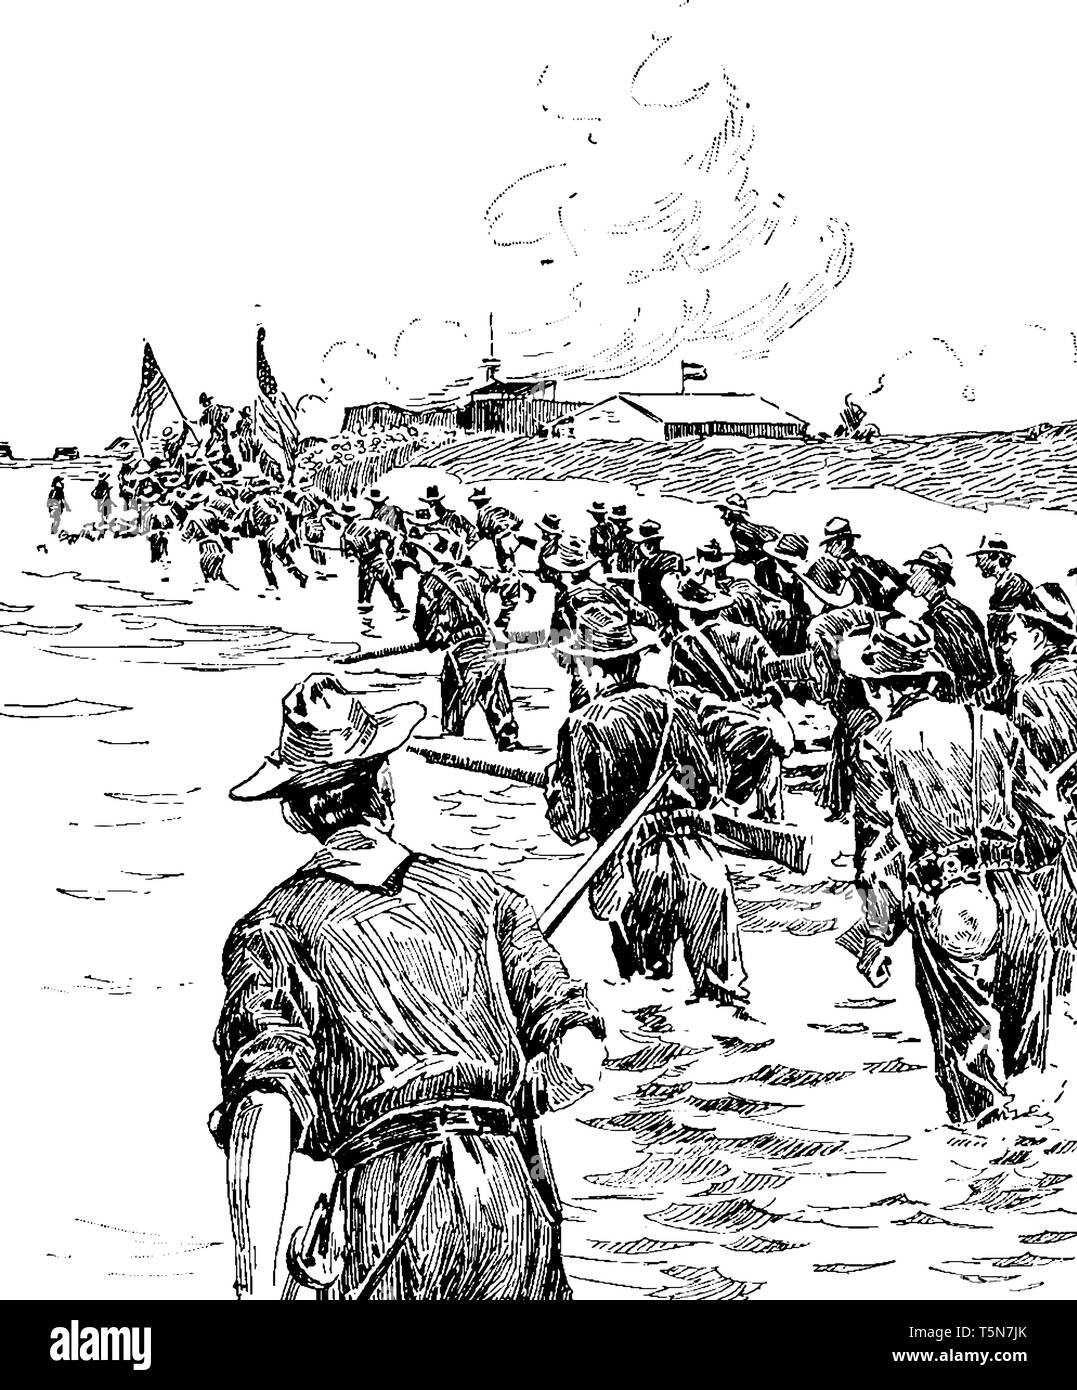 The Capture of Manila waged war with the Spaniards and Filipinos in the Spanish American War and the Philippine American War, vintage line drawing or  Stock Vector